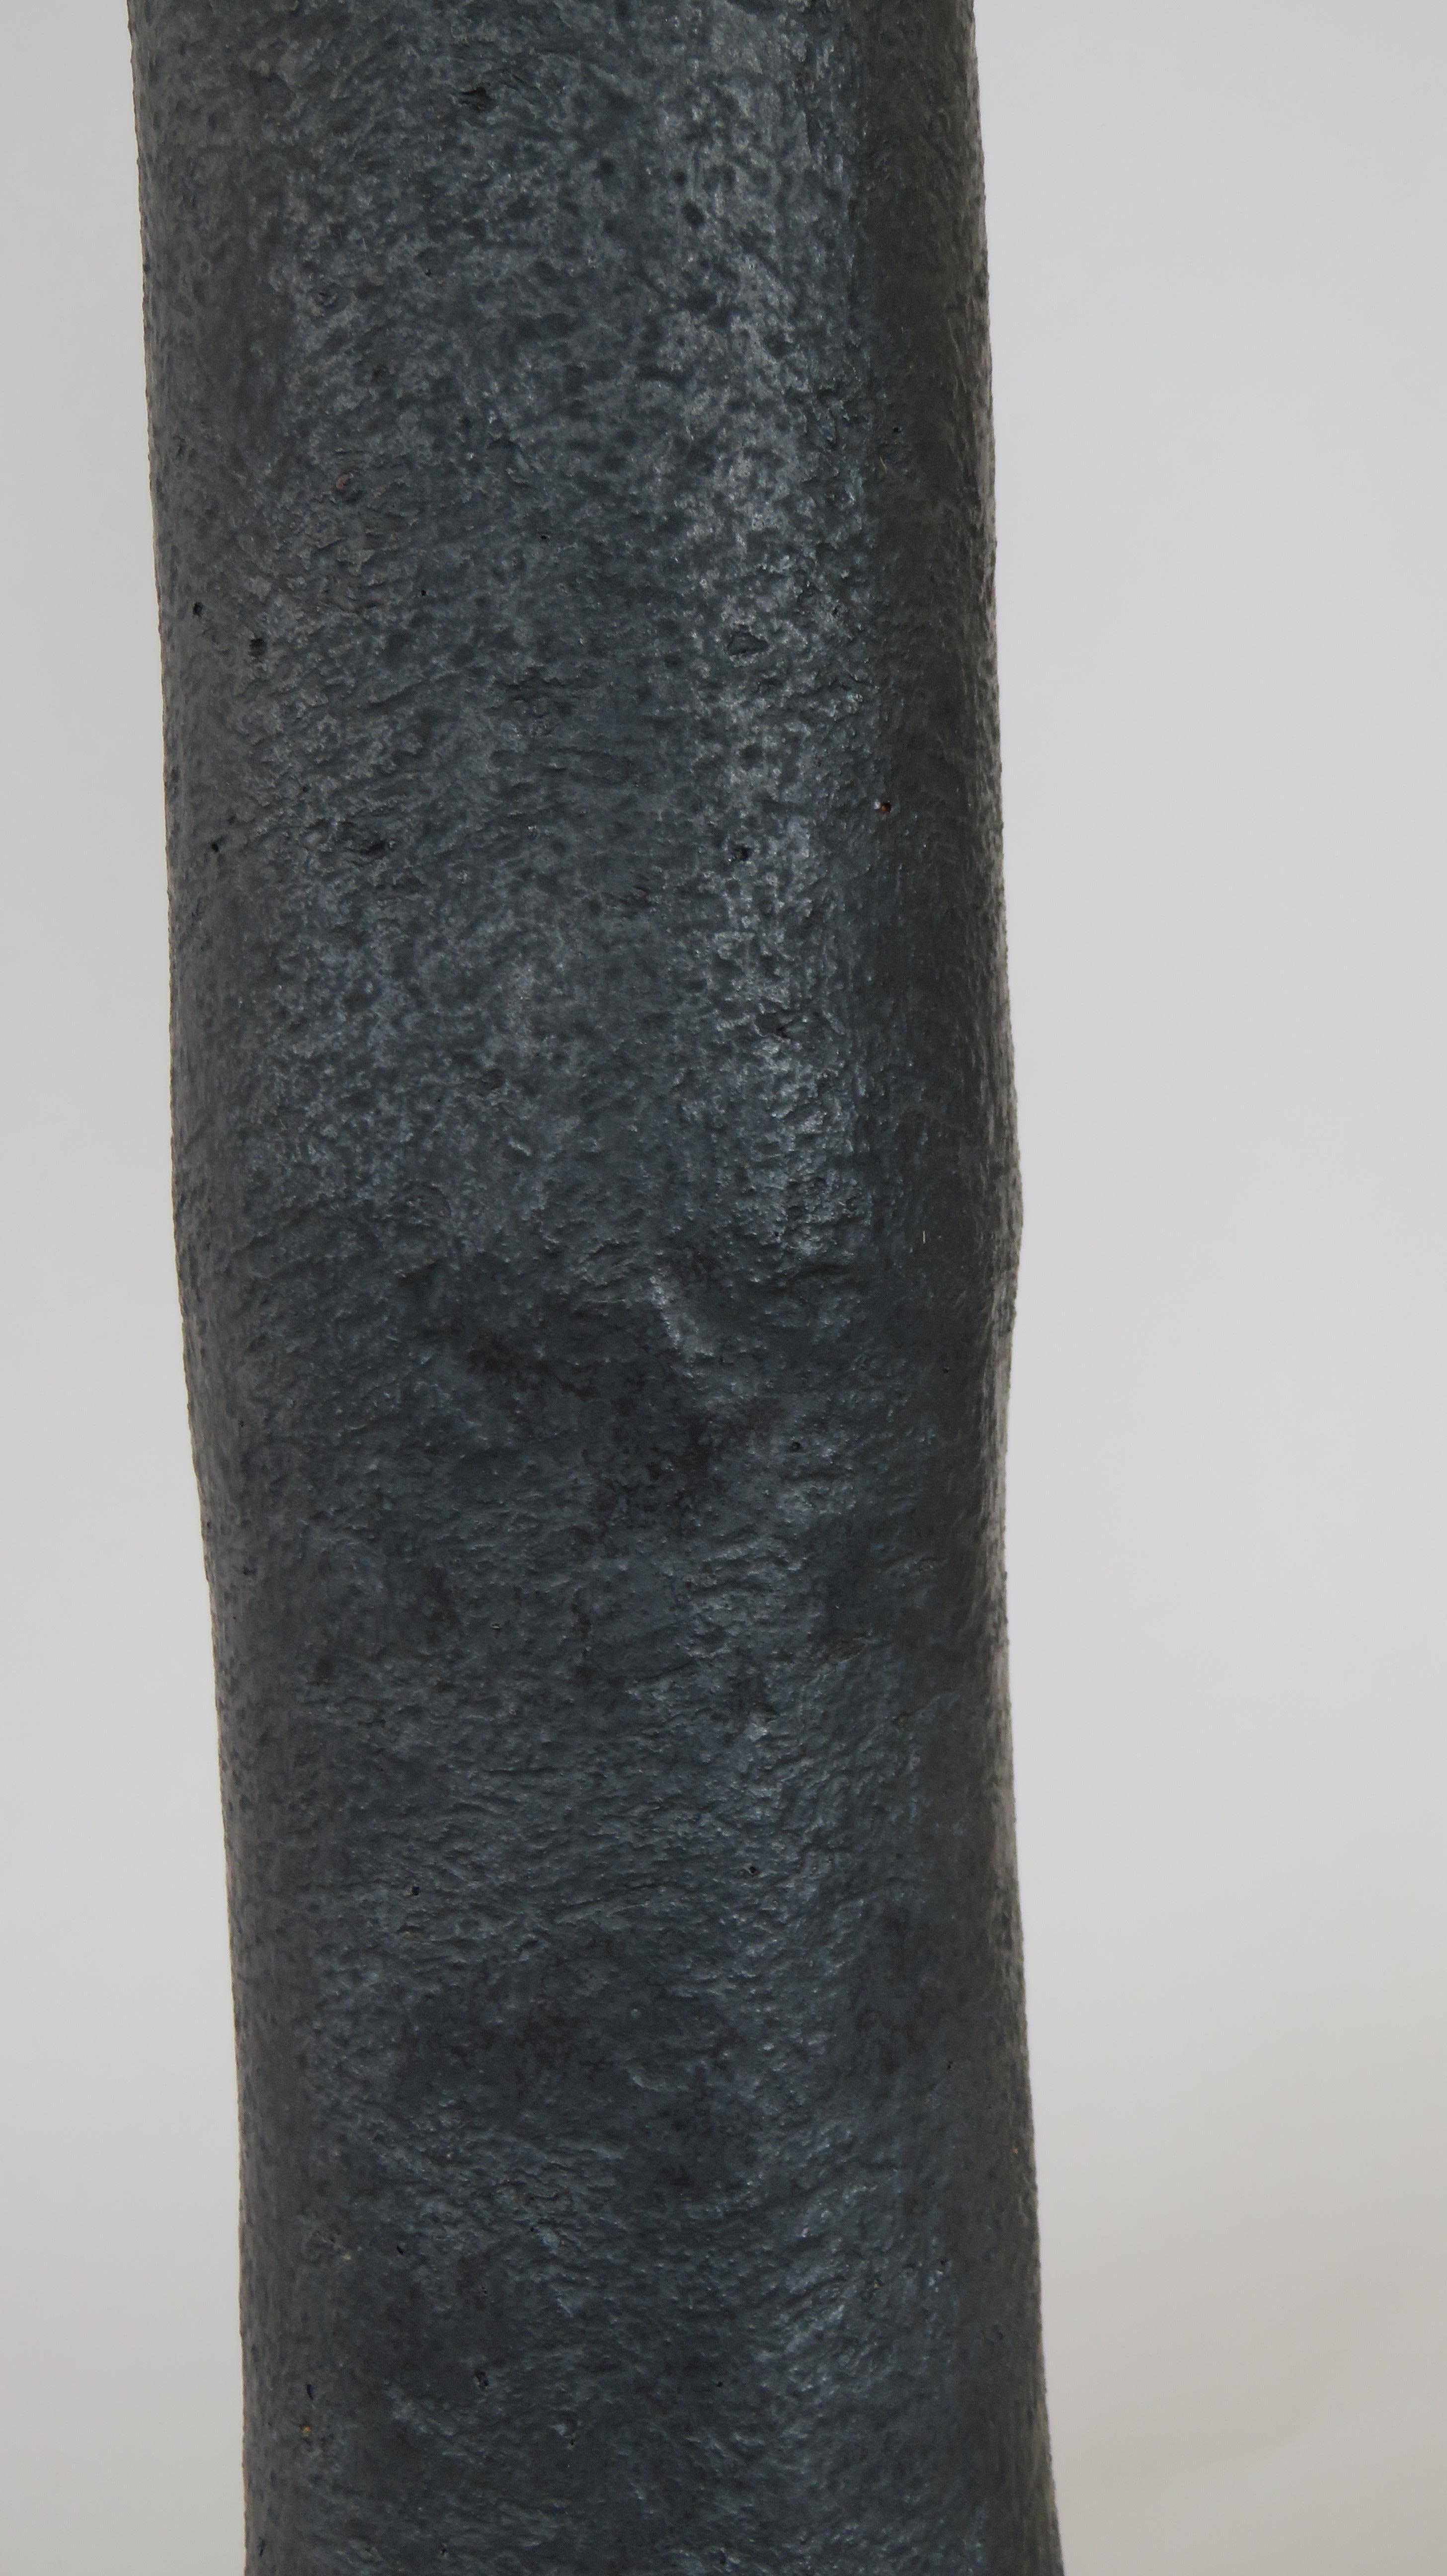 Hand-Crafted Tall Tubular Metallic Black Stoneware Vase, Hand Built, 17.5 Inches Tall